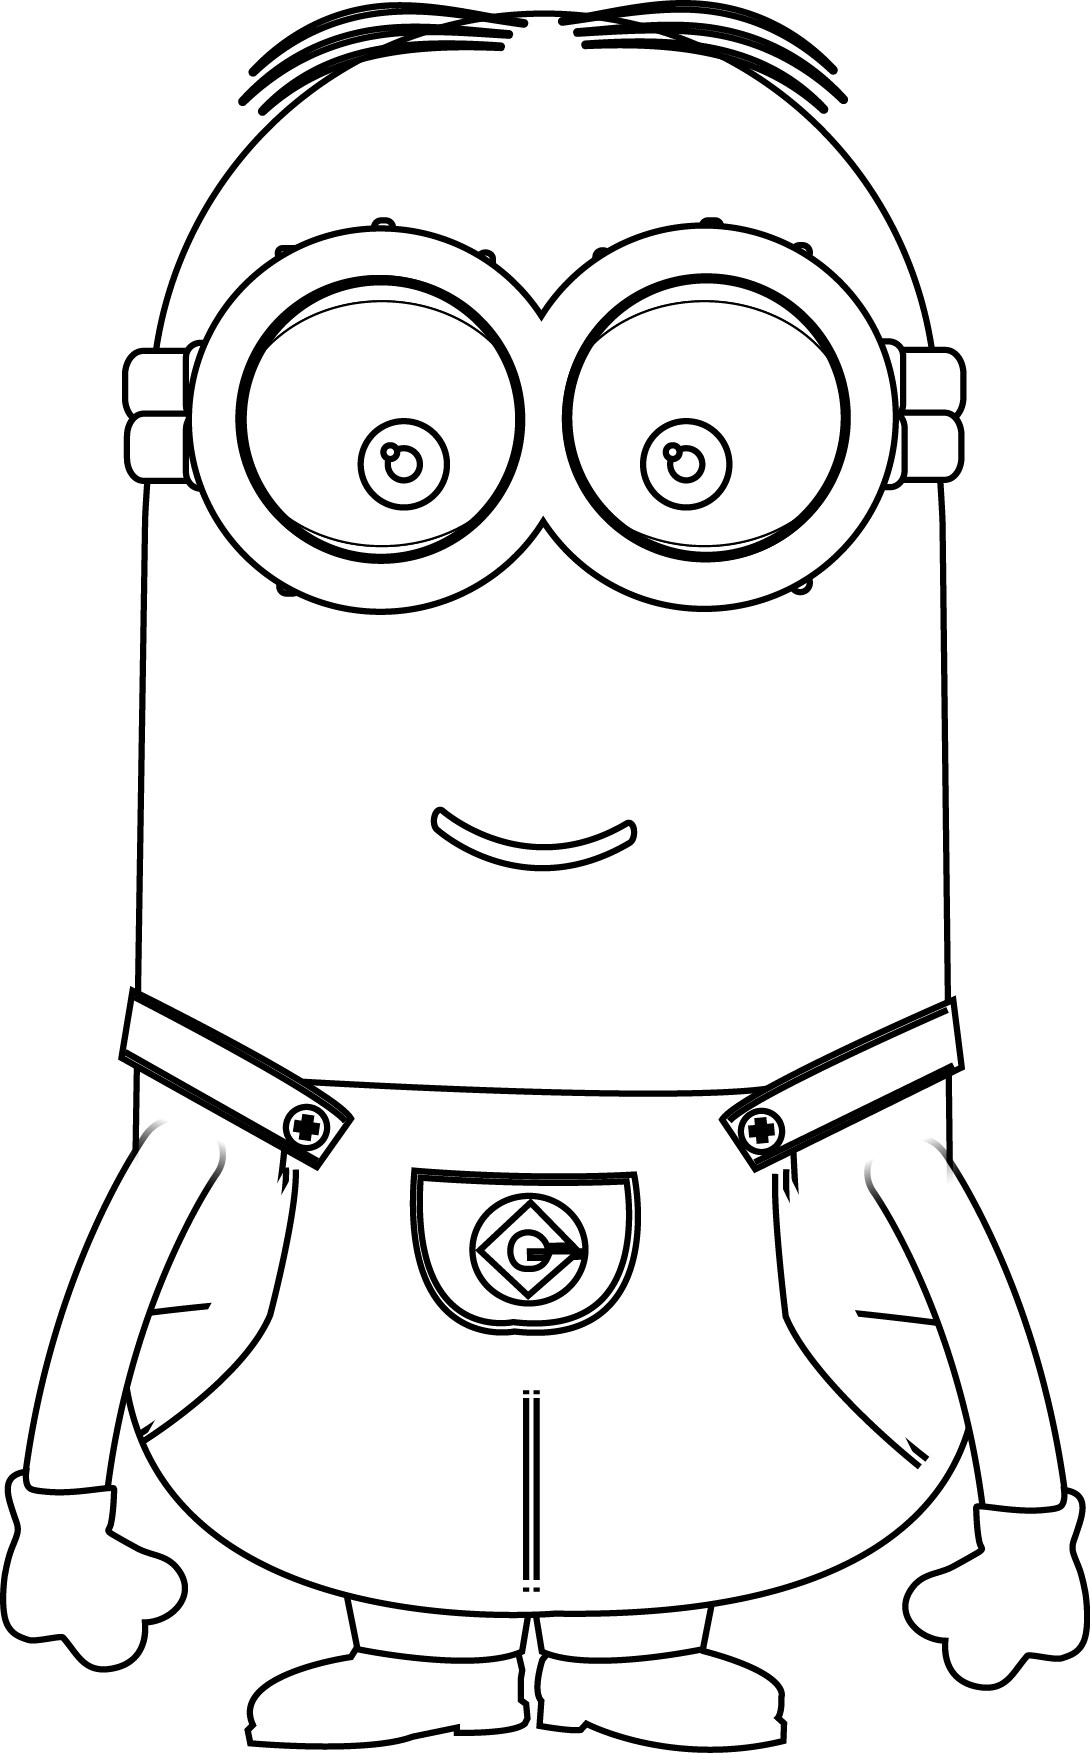 Free Printable Minions Coloring Pages
 Coloring Minions